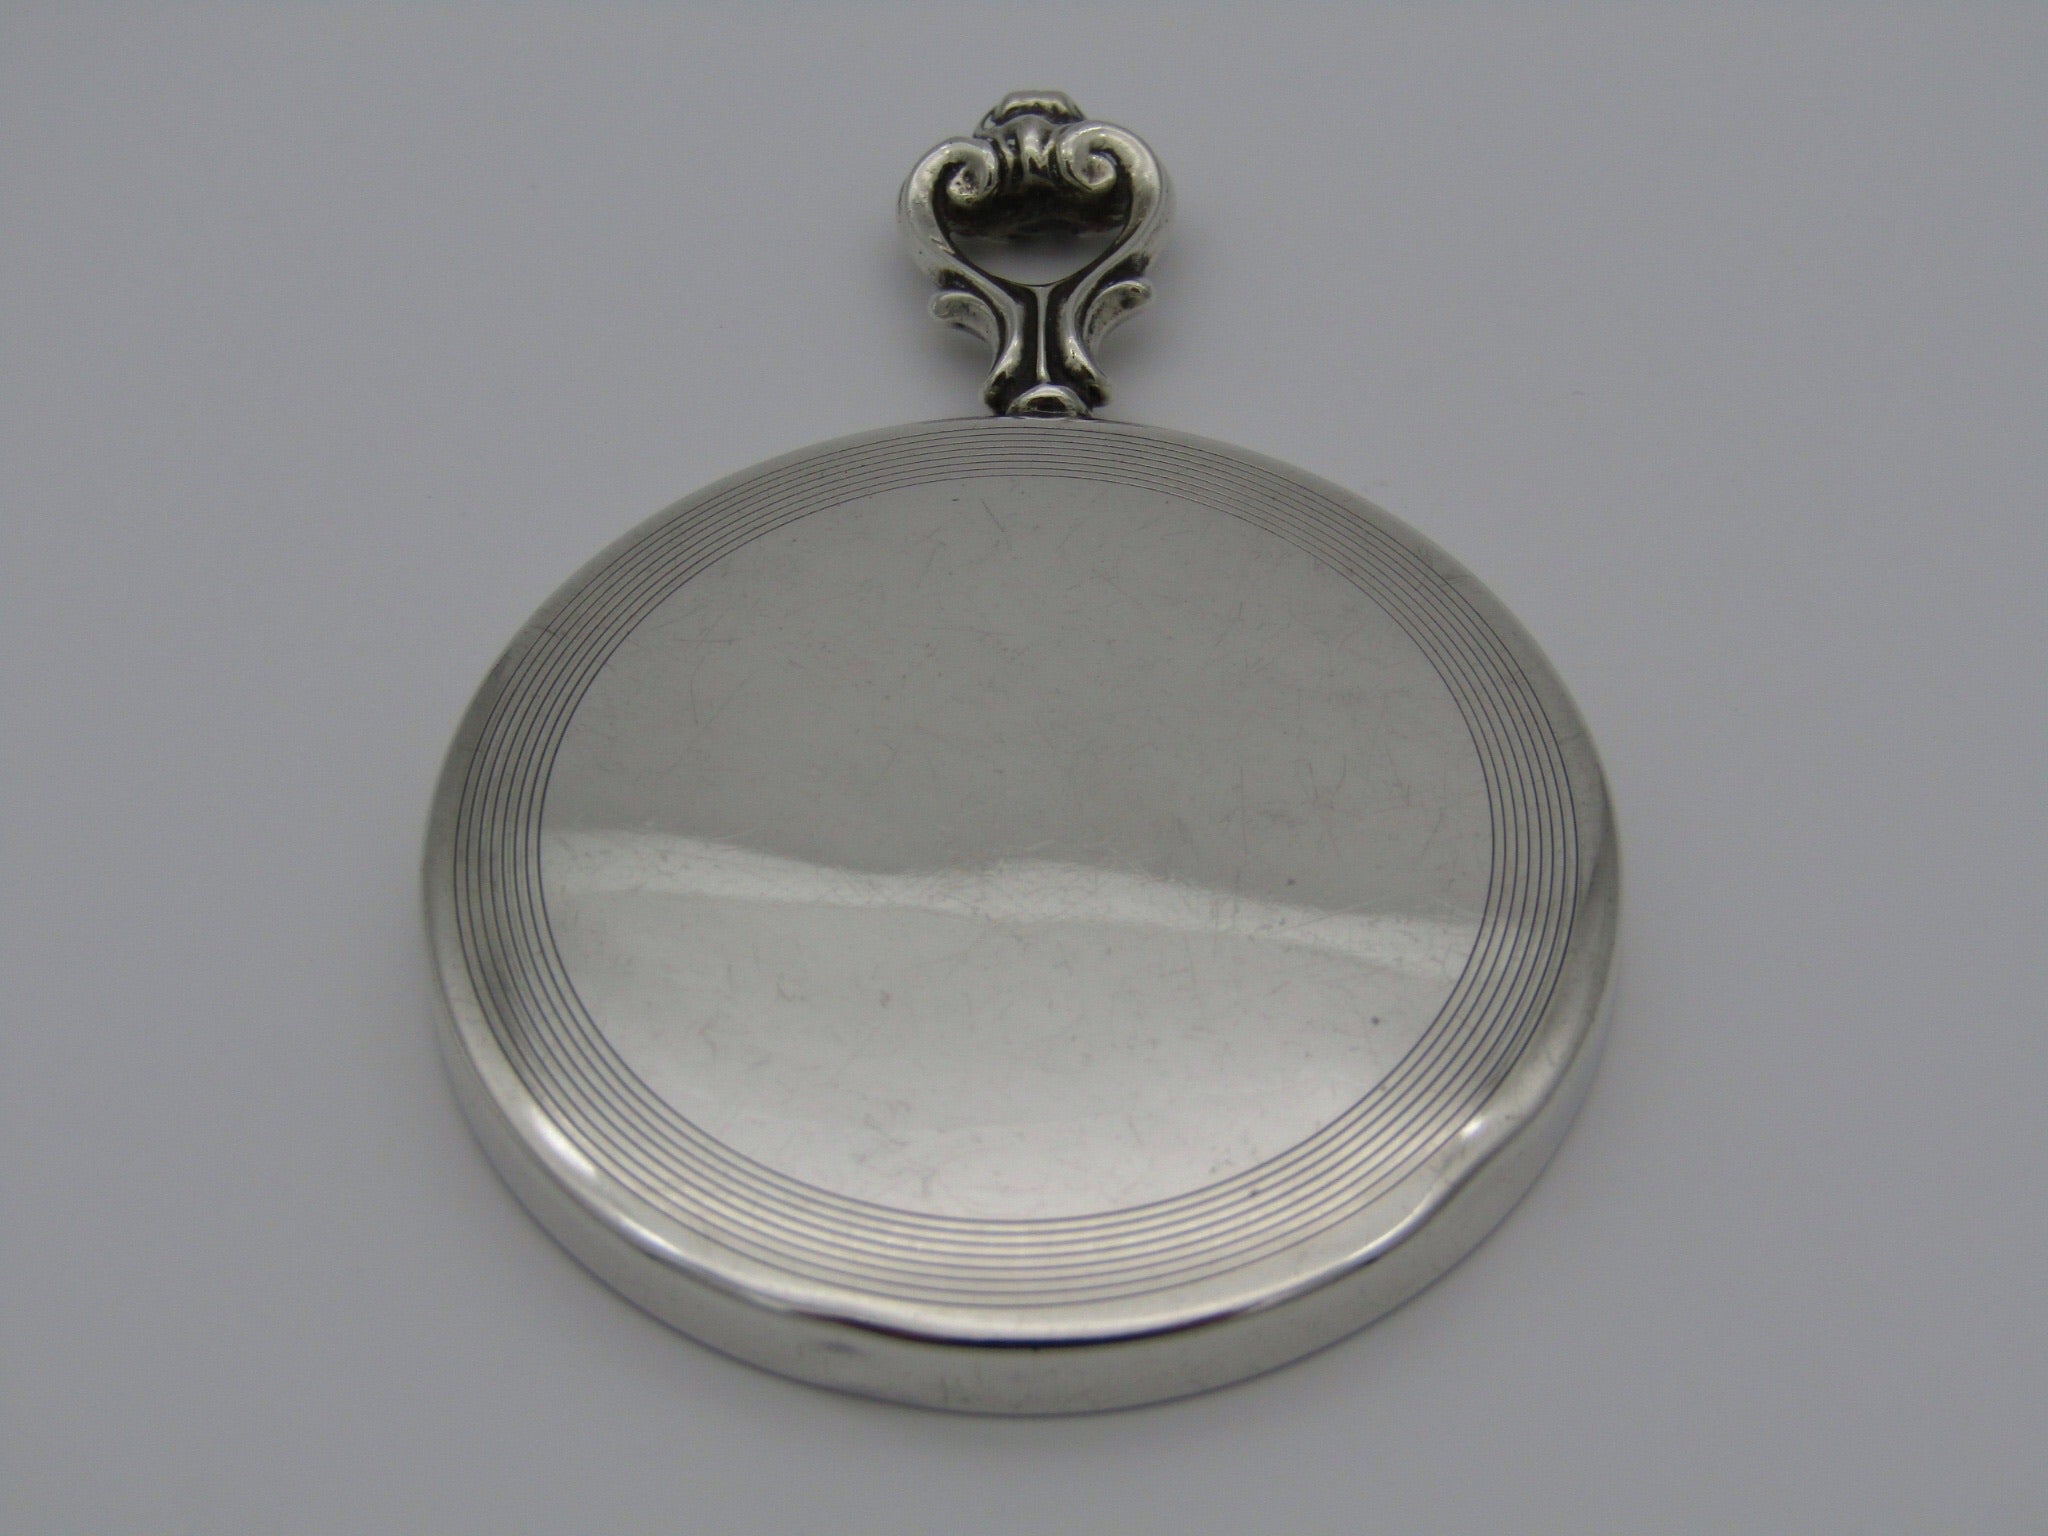 A sterling silver hand mirror by Cartier. Circa 1920s.